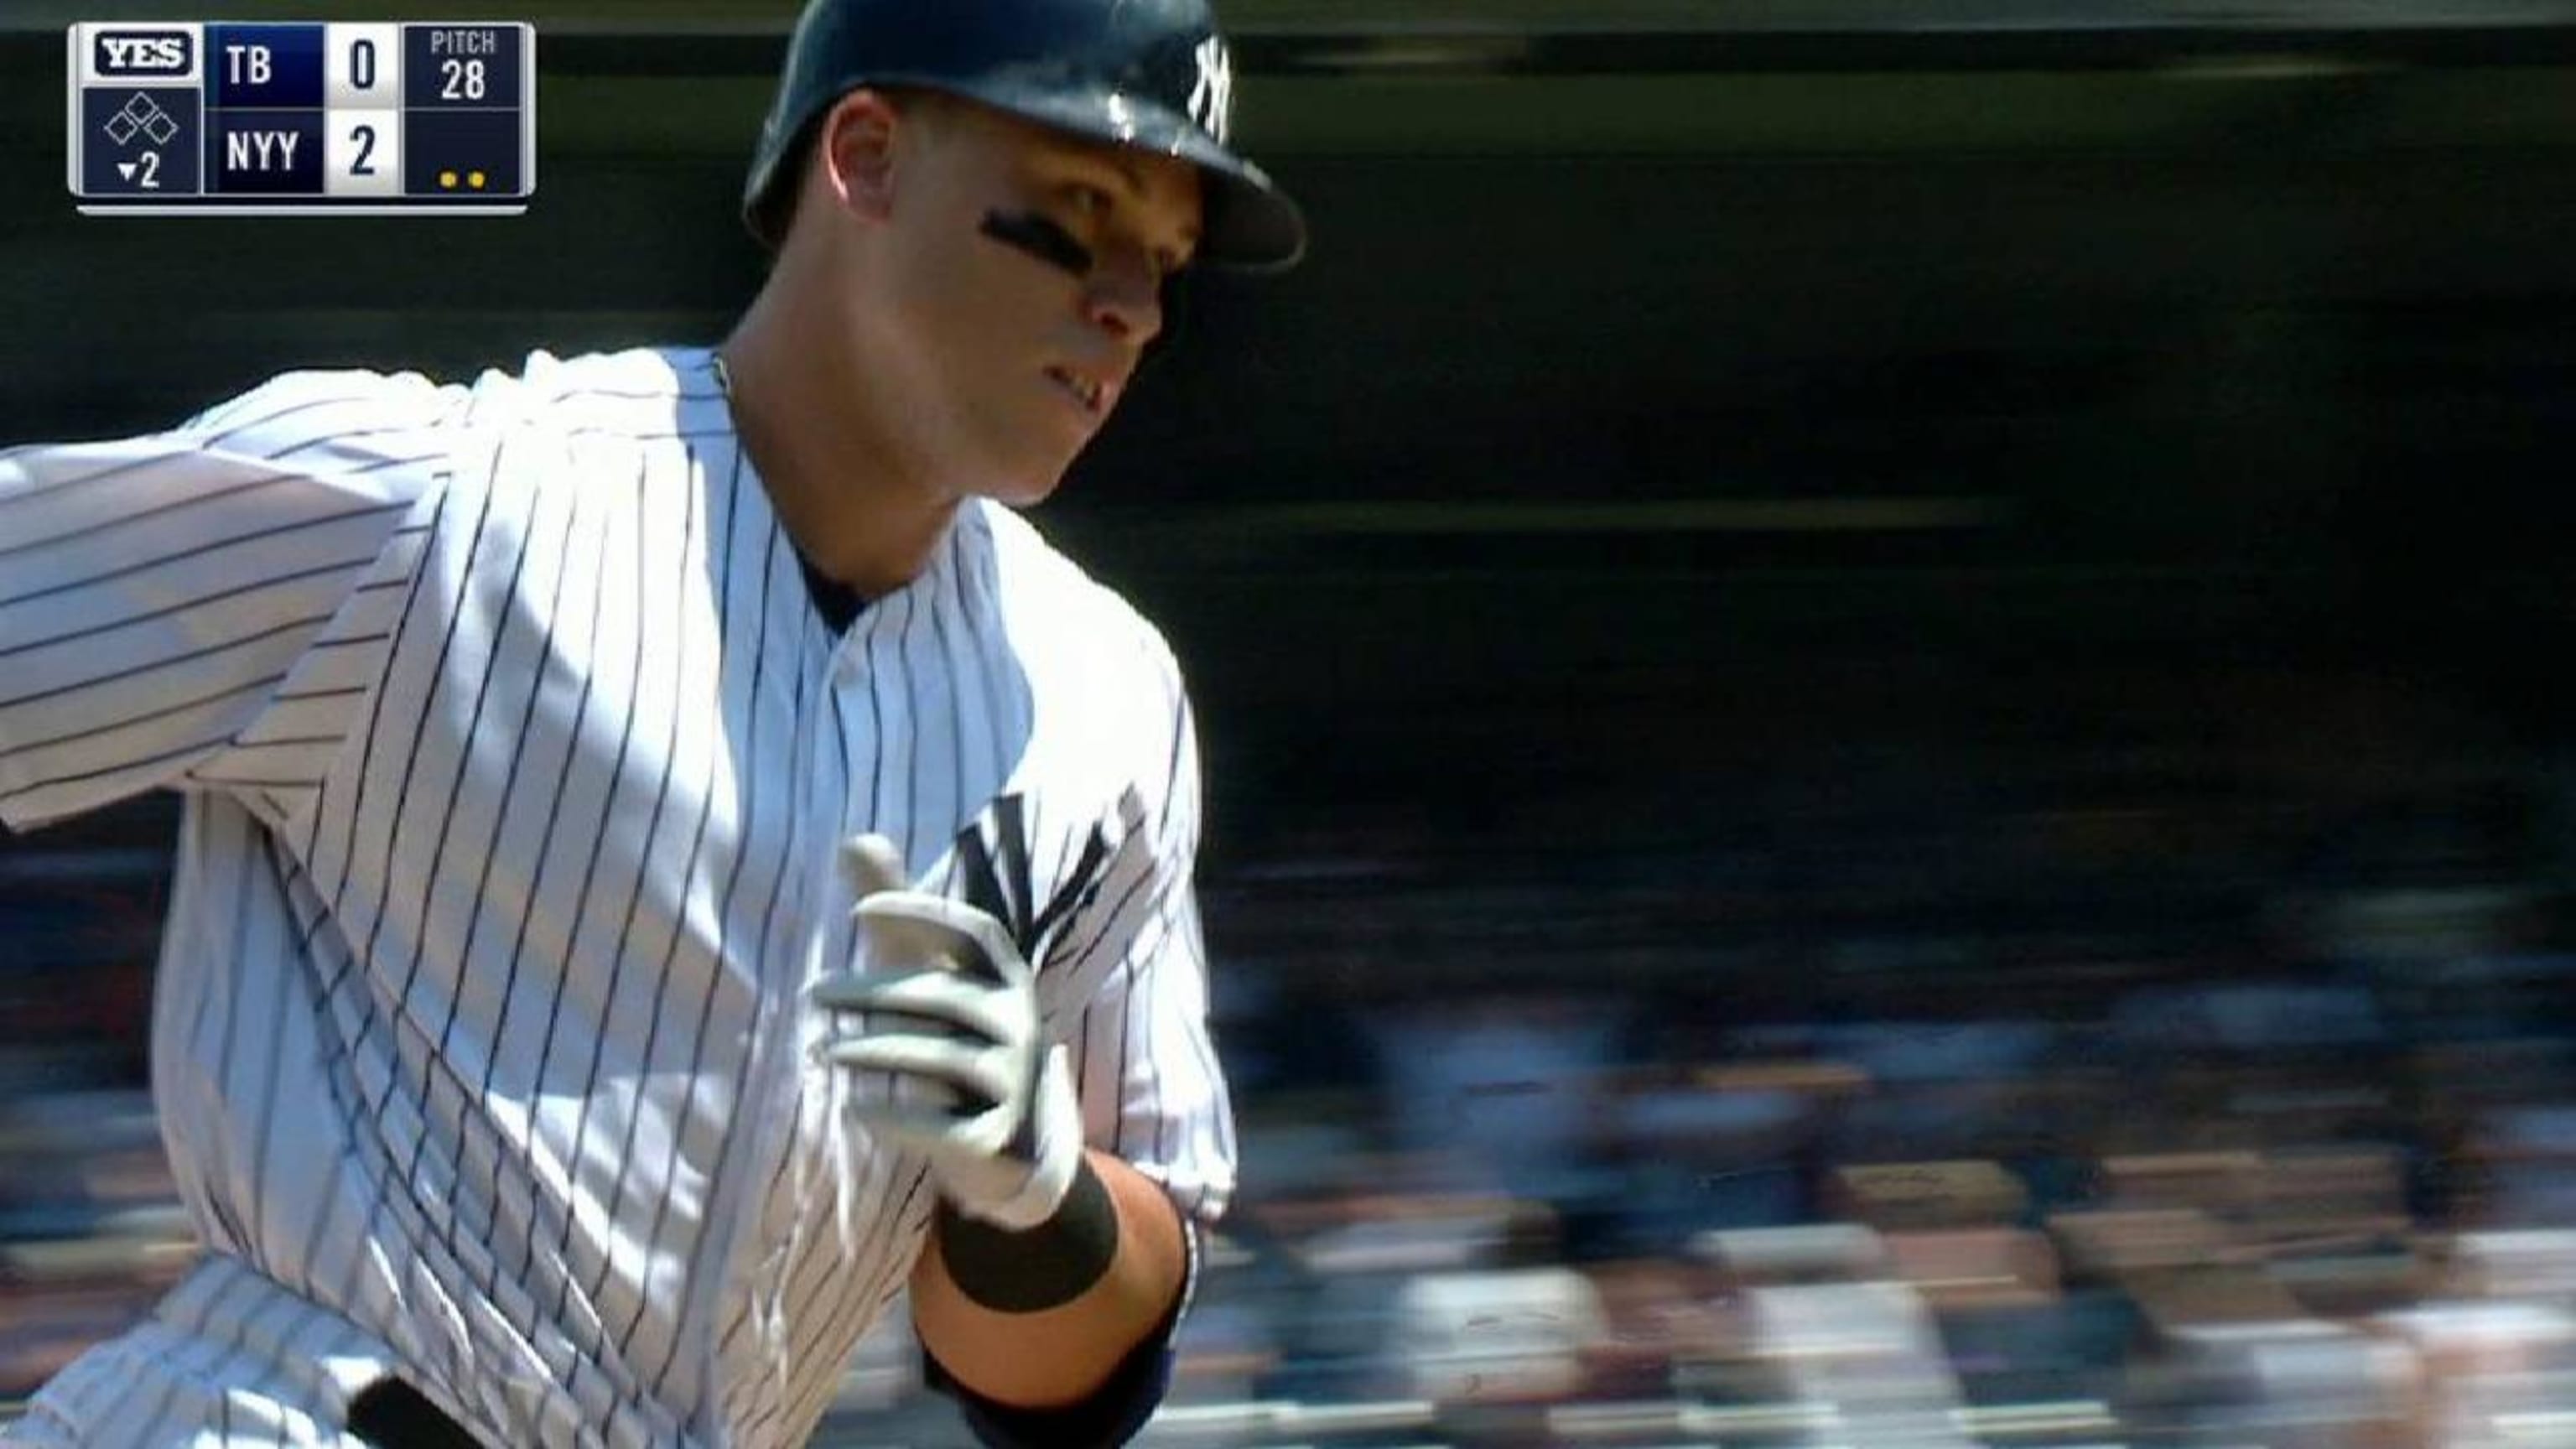 Aaron Judge Turns Into MLB's Best Hitter After Incorporating A